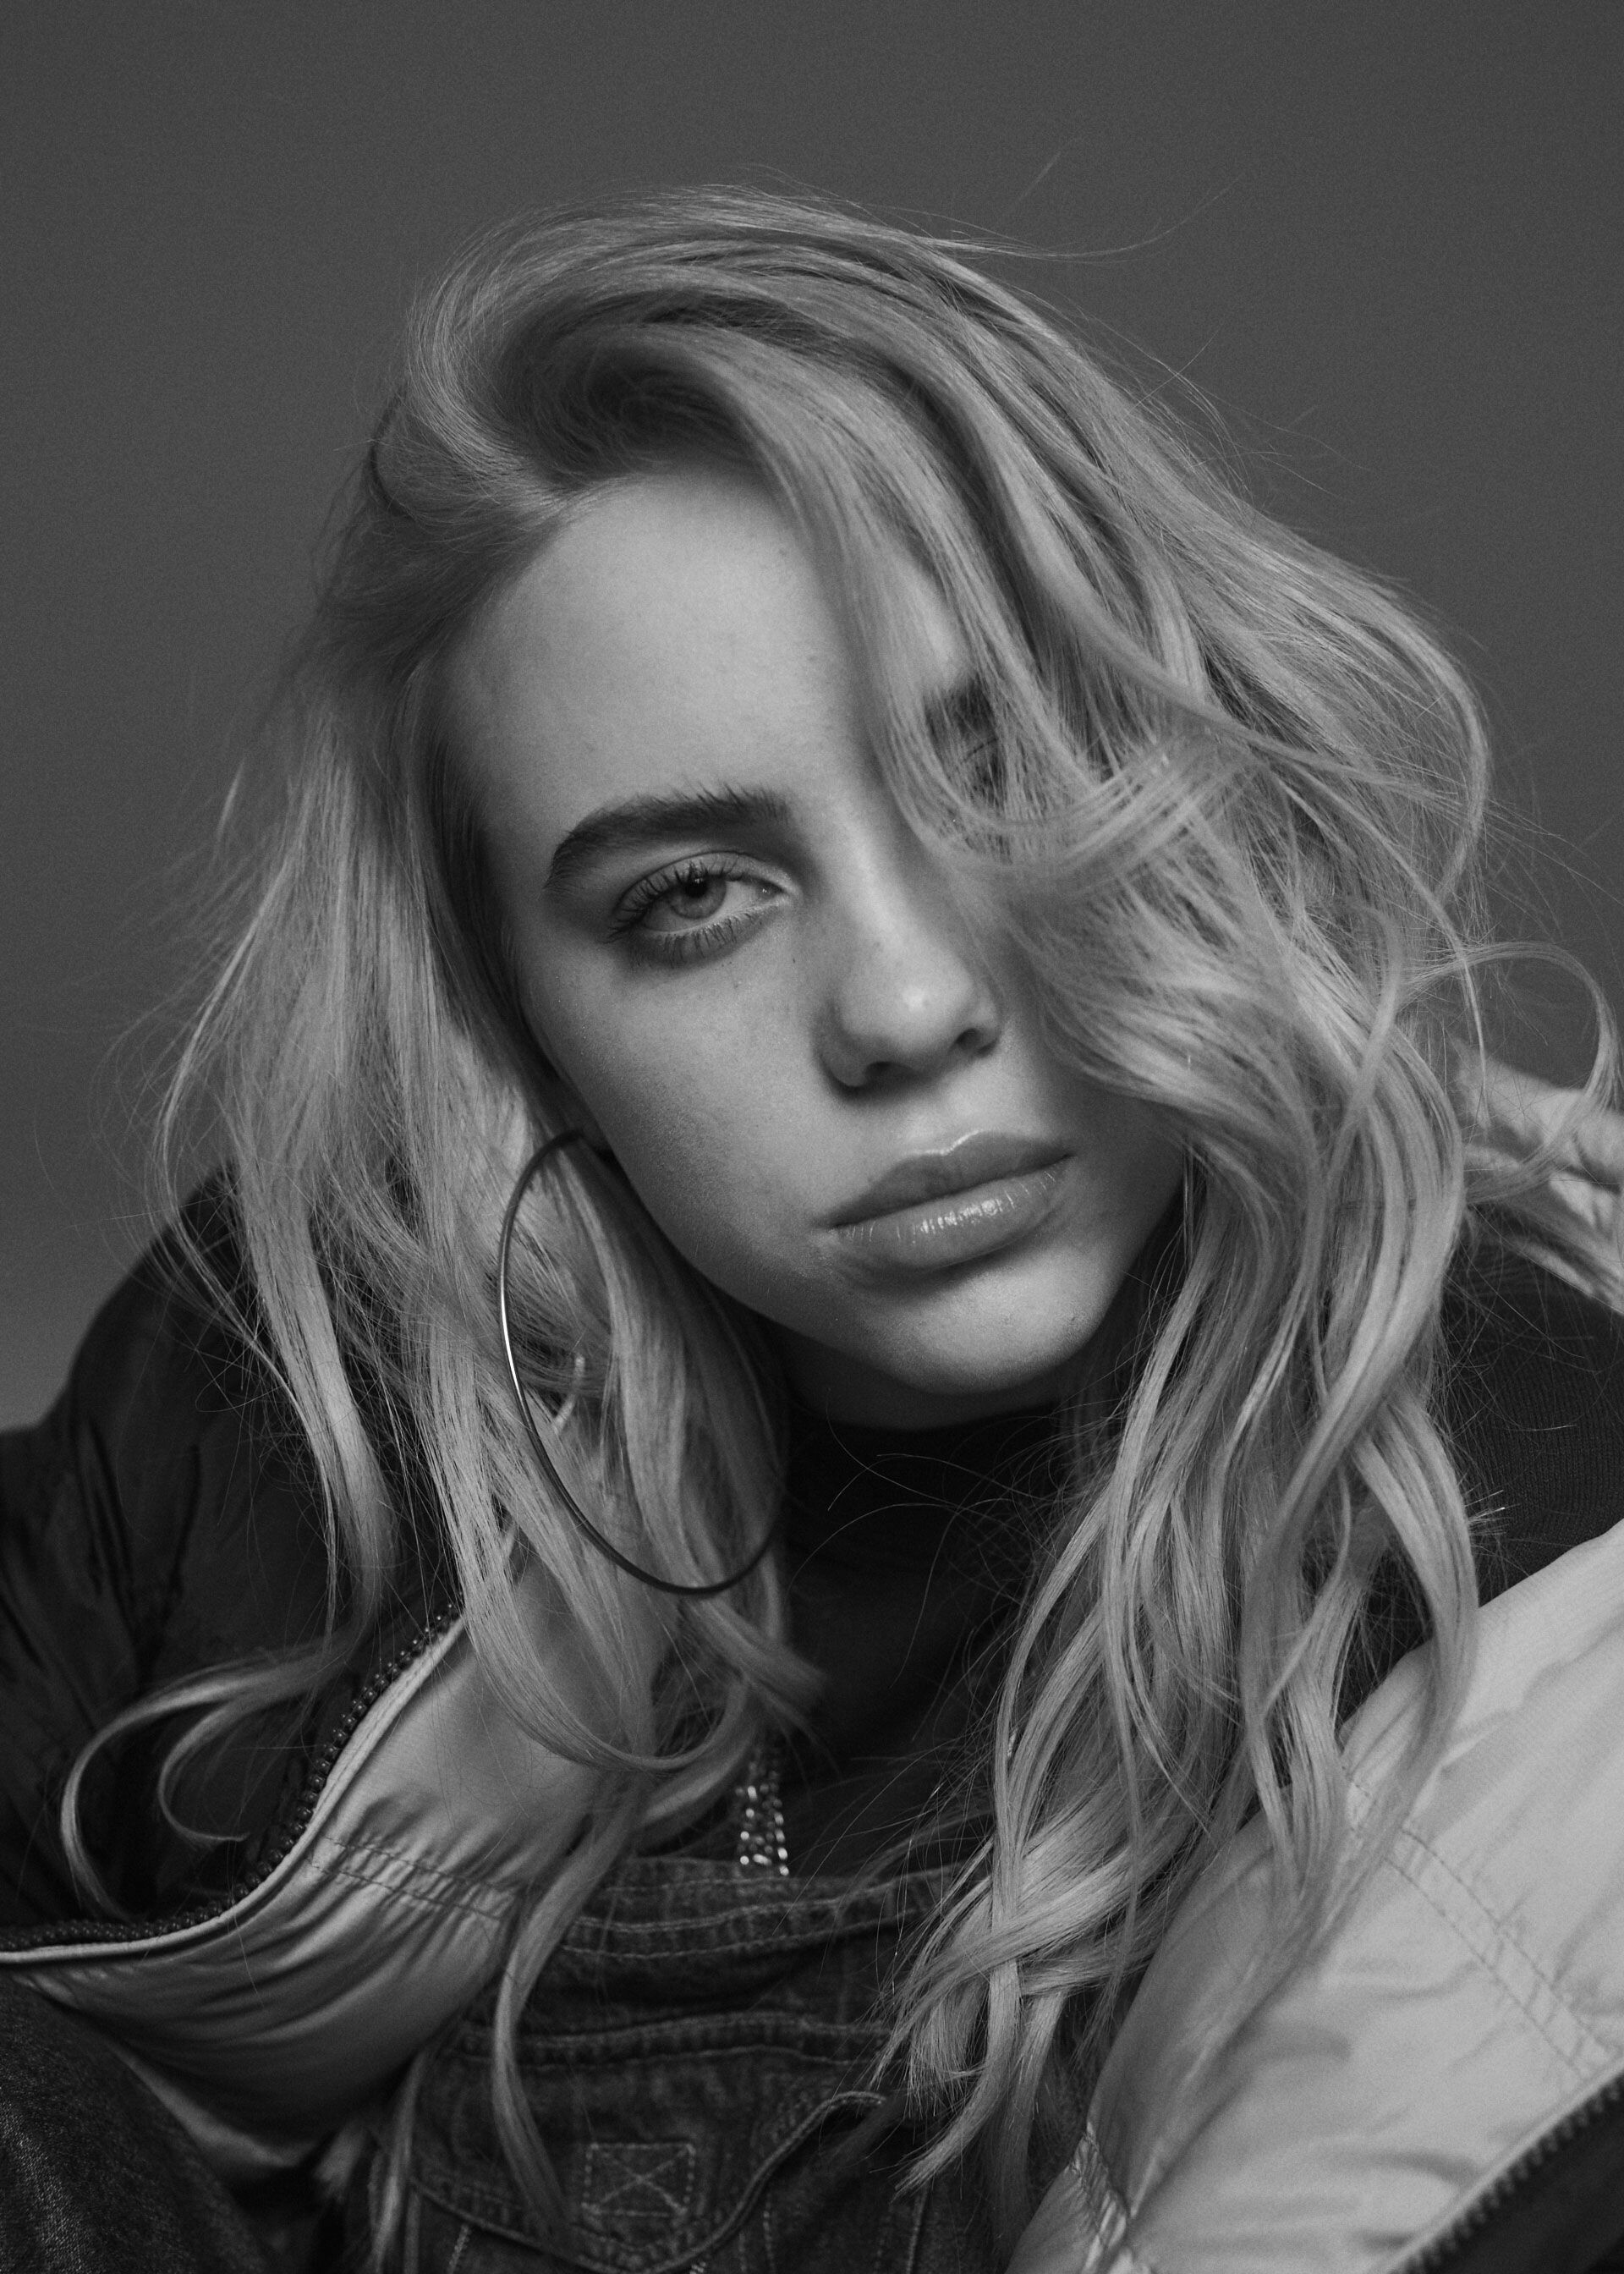 Billie Eilish: An American singer and songwriter born in Los Angeles, California, Monochrome. 1920x2690 HD Background.